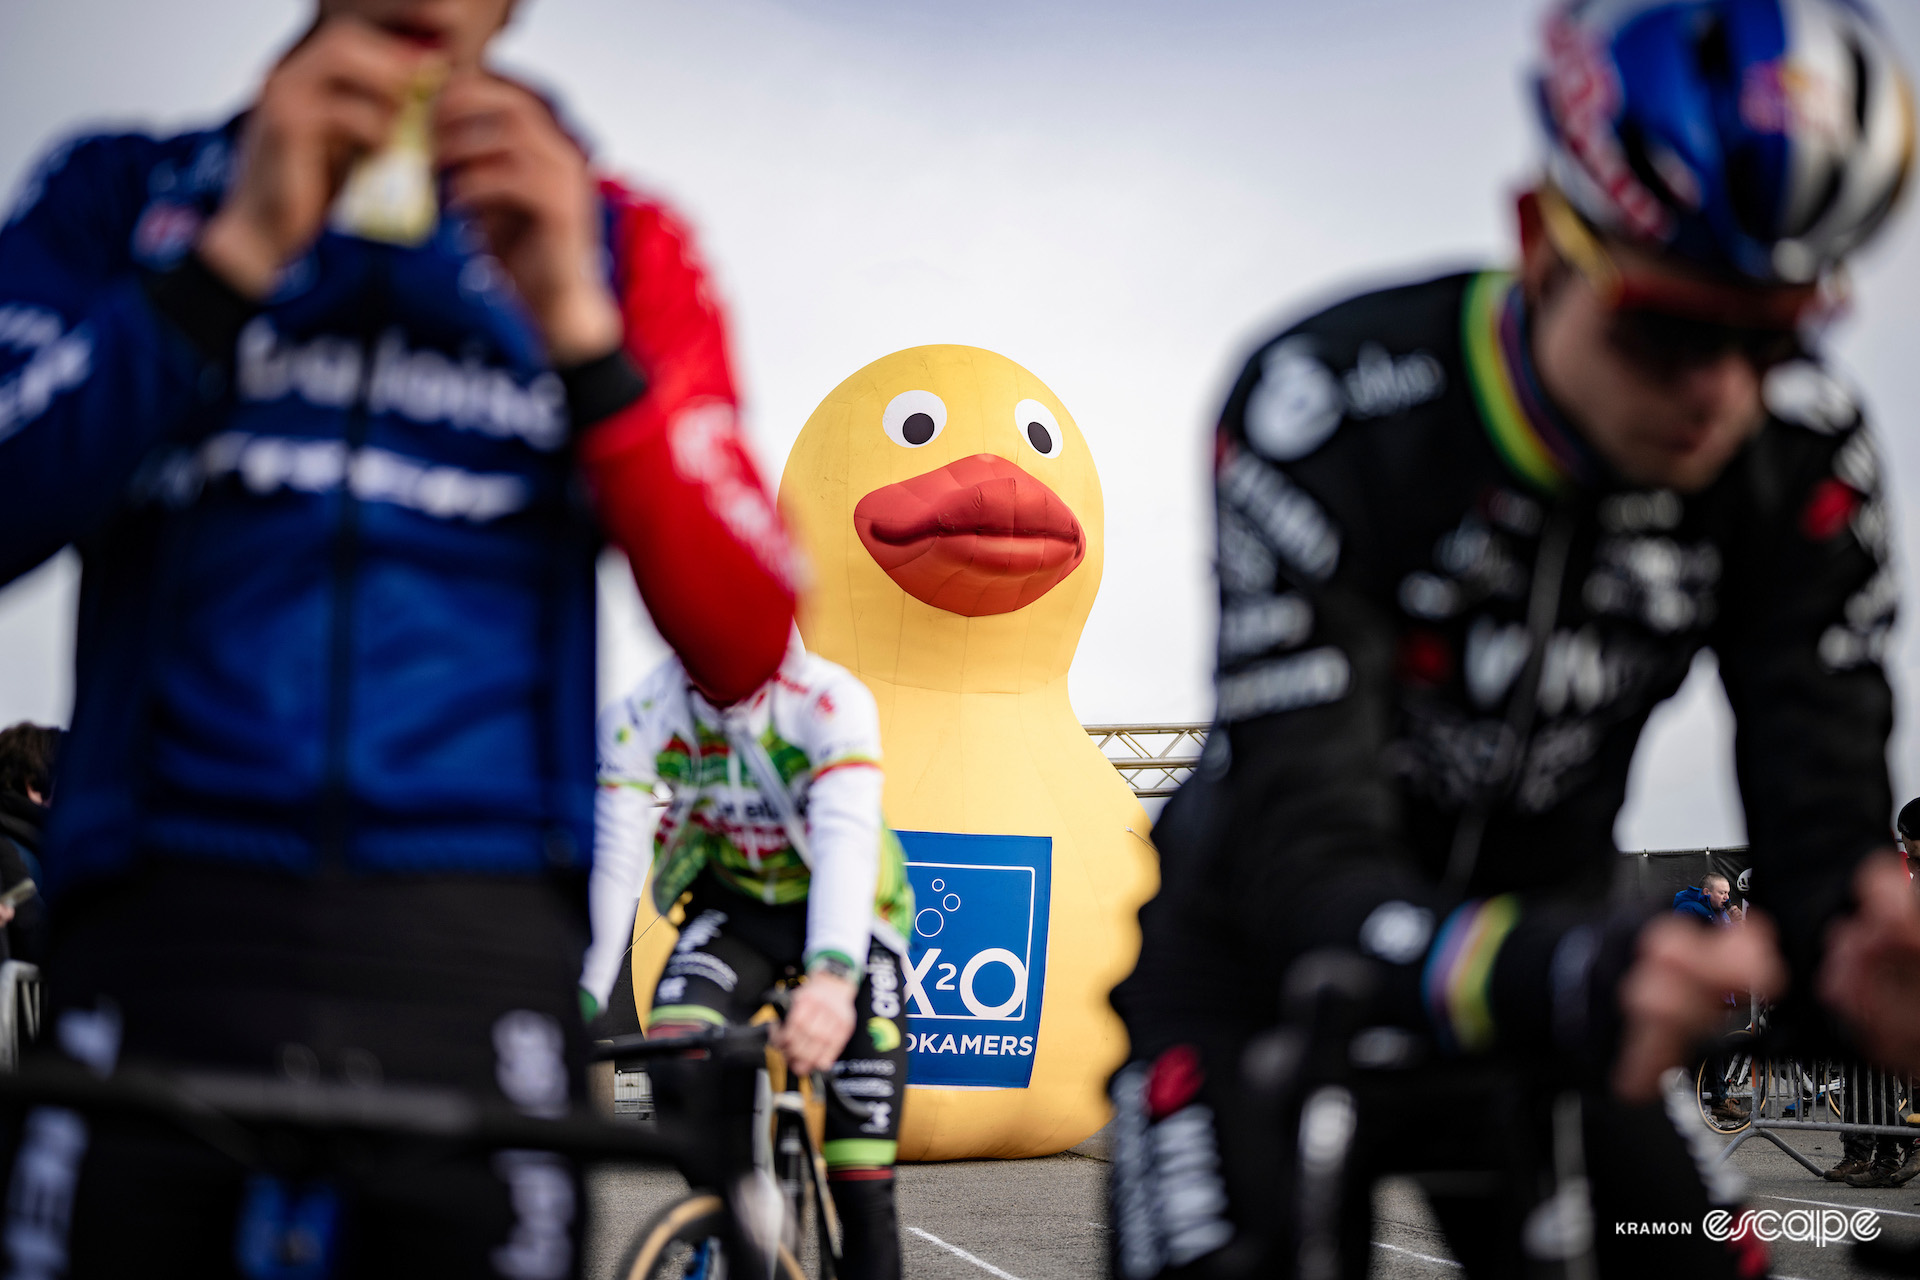 The large inflatable duck that announces the X20 Badkamers sponsor behind the start line at X2O Trofee Koksijde - Vlaamse Duinencross, Wout van Aert and Thibau Nys out of focus in the foreground.